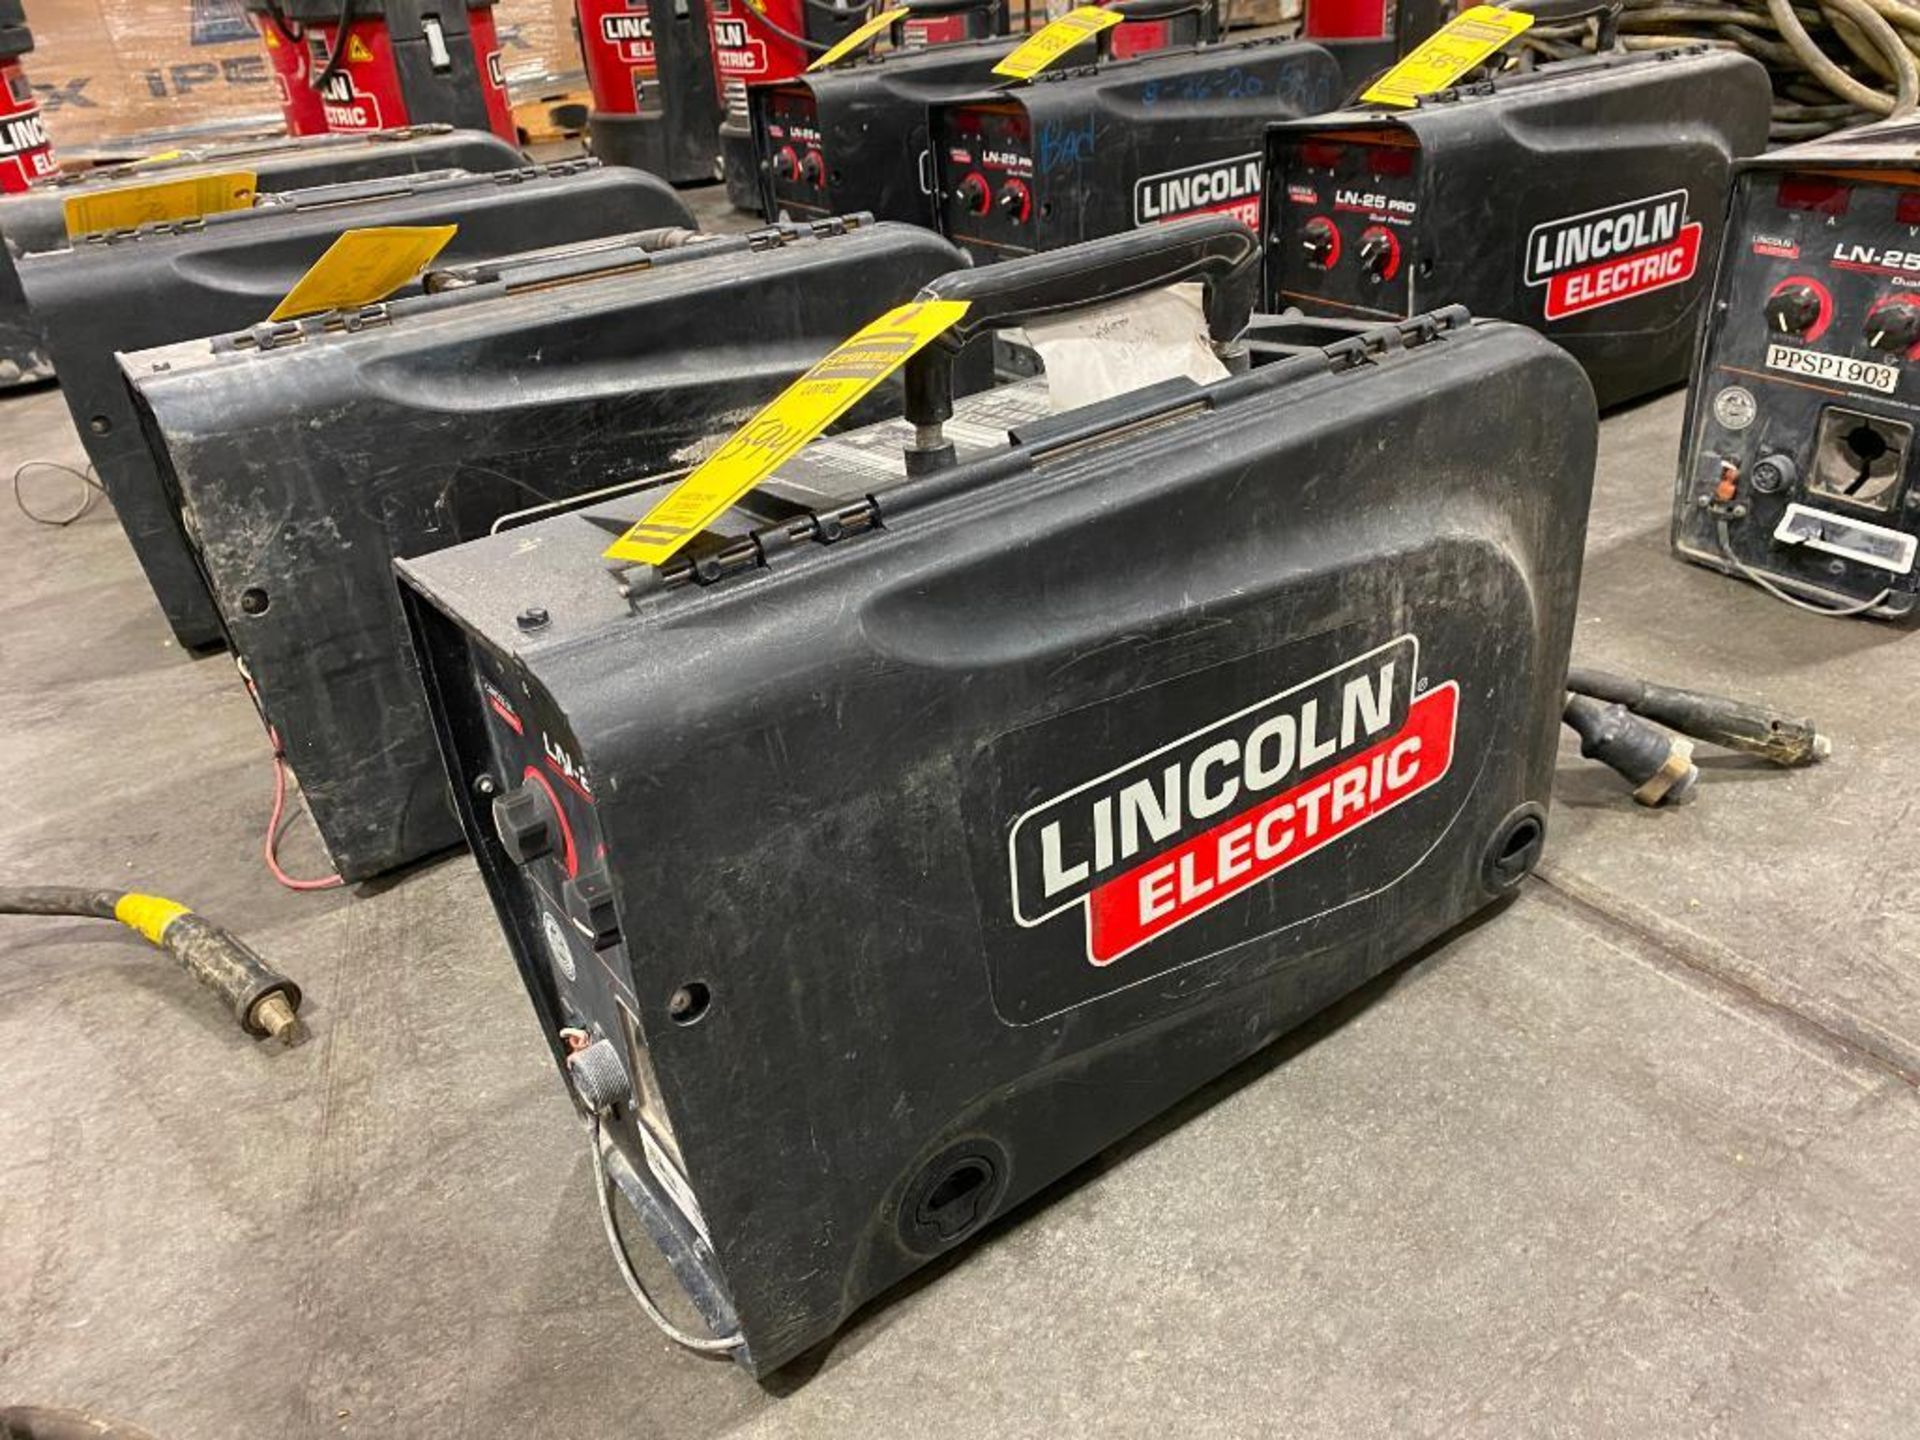 Lincoln LN-25 Pro Dual Power Wire Feeder Suitcase Welder, S/N U1190906910 - Image 2 of 3